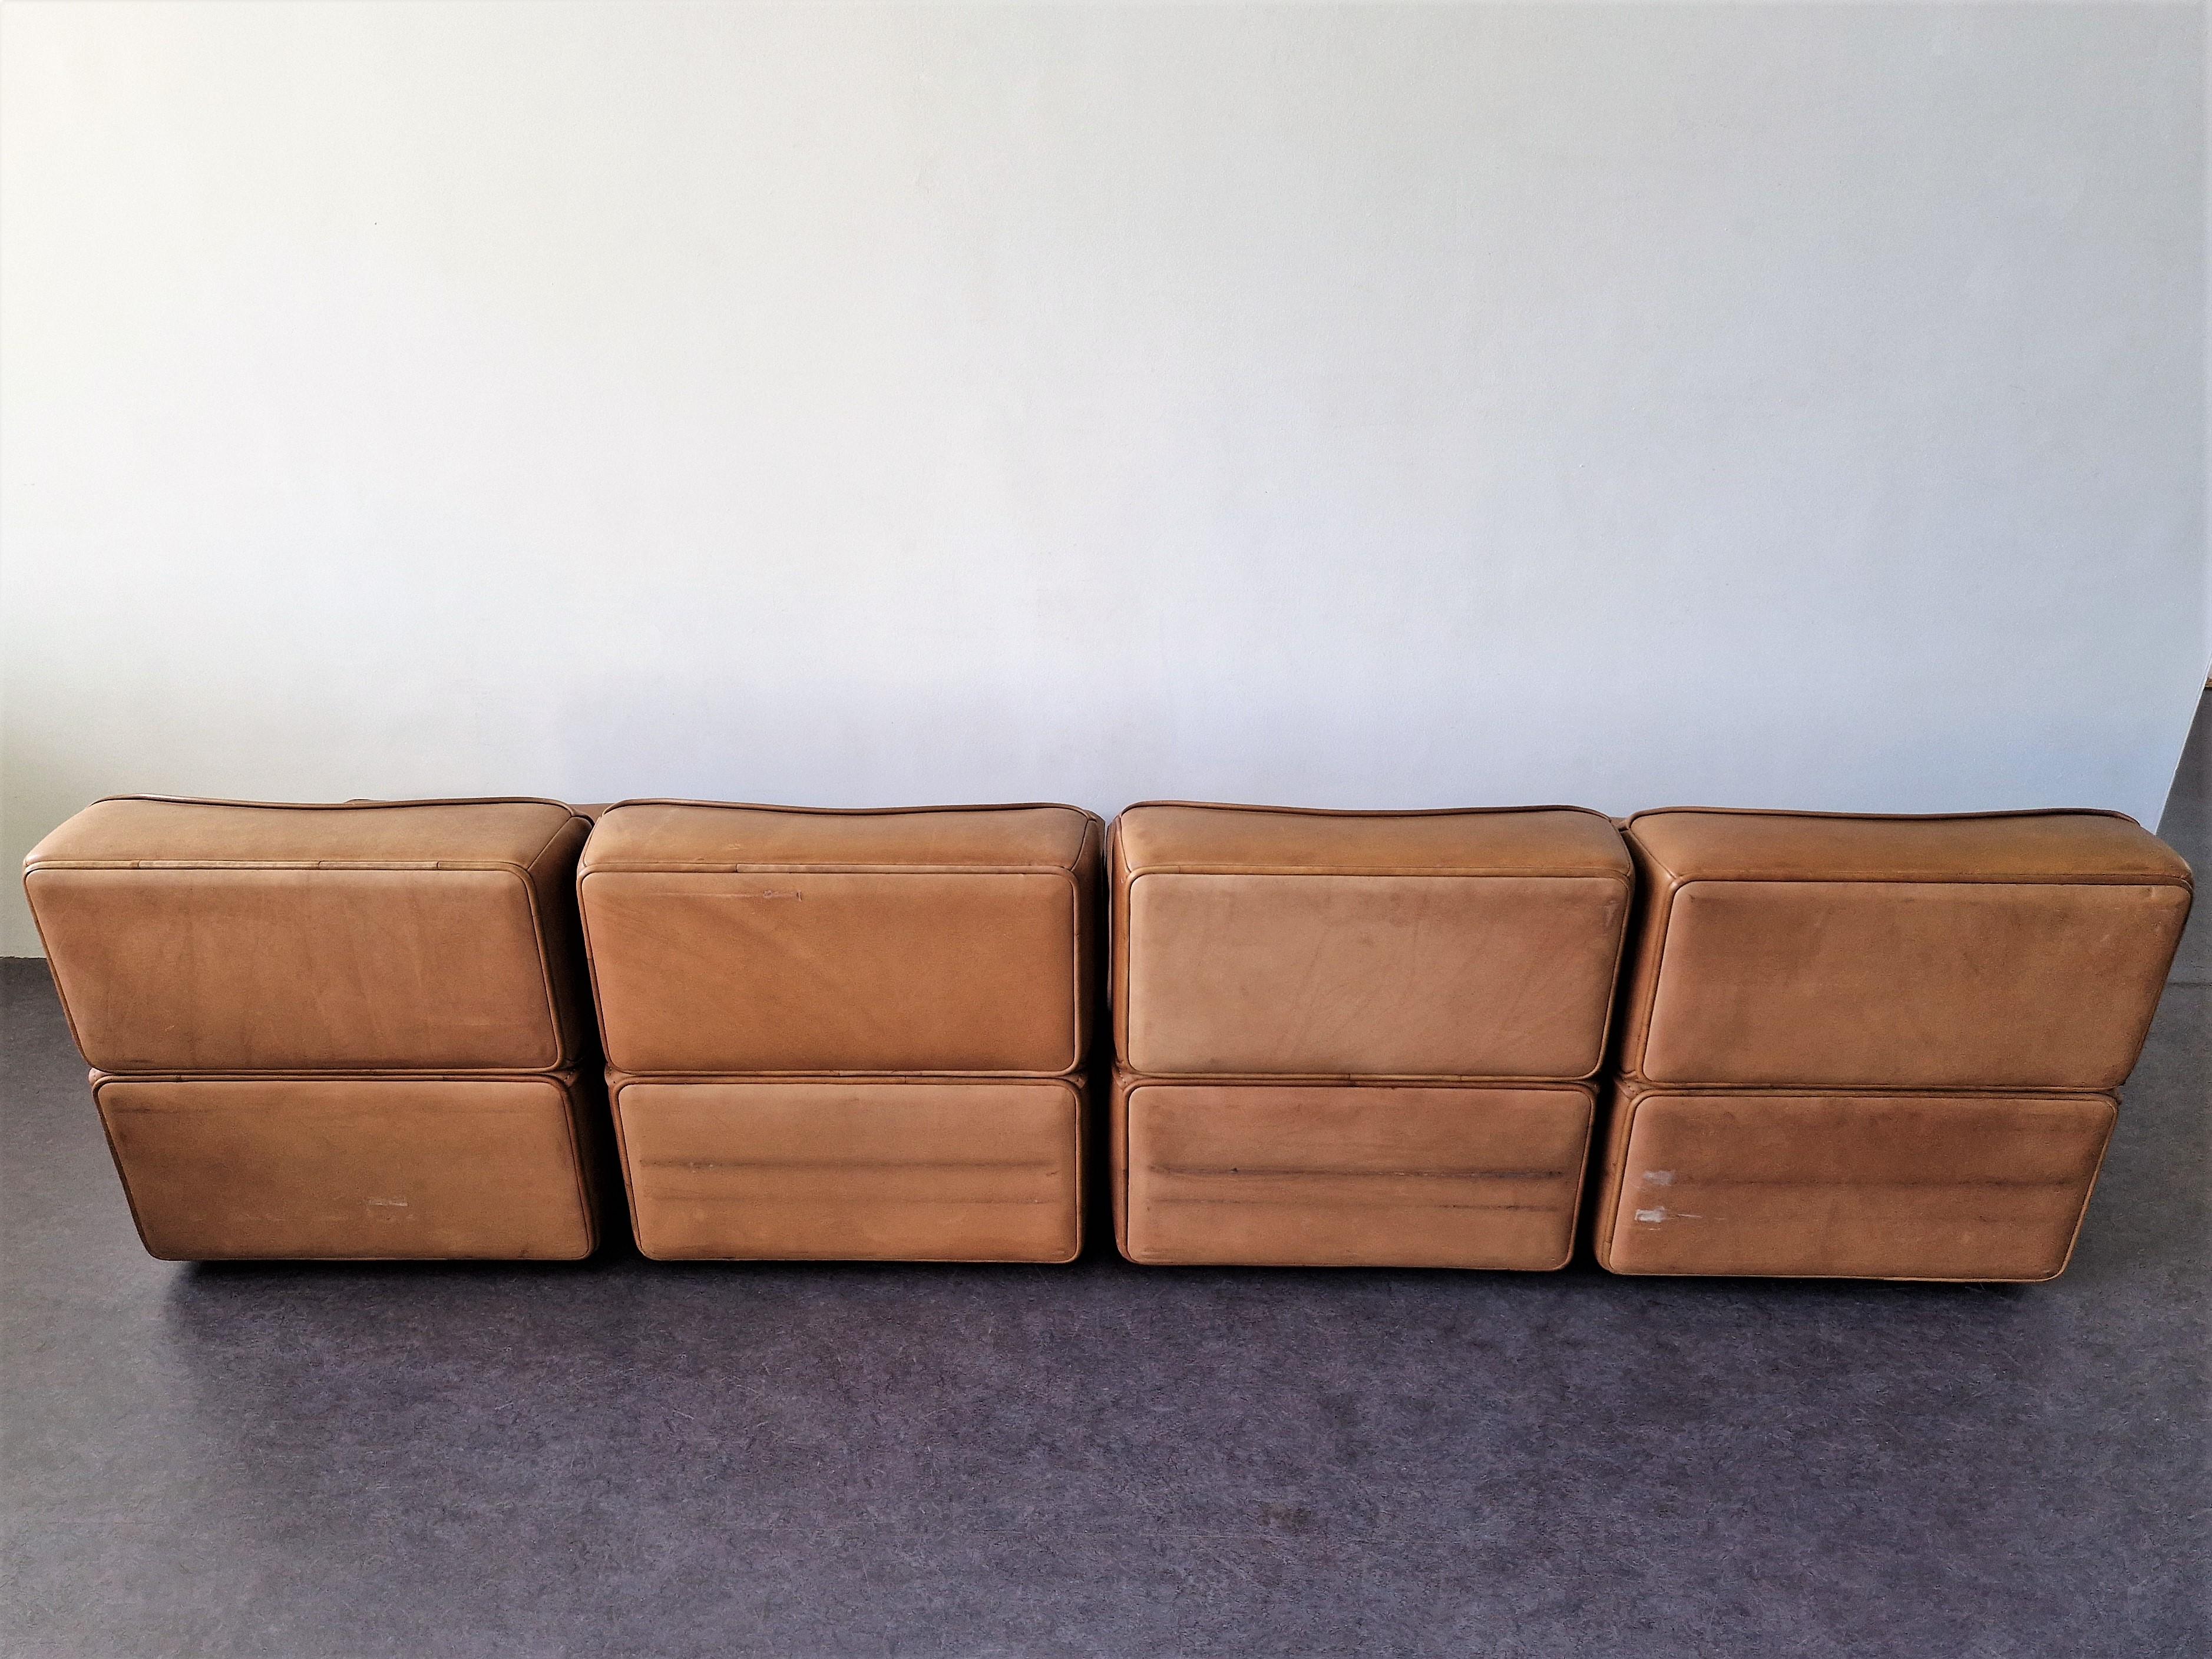 Swiss Beautifully Patinated Ds-15 4-Element Leather Sofa for De Sede, Switzerland, 70s